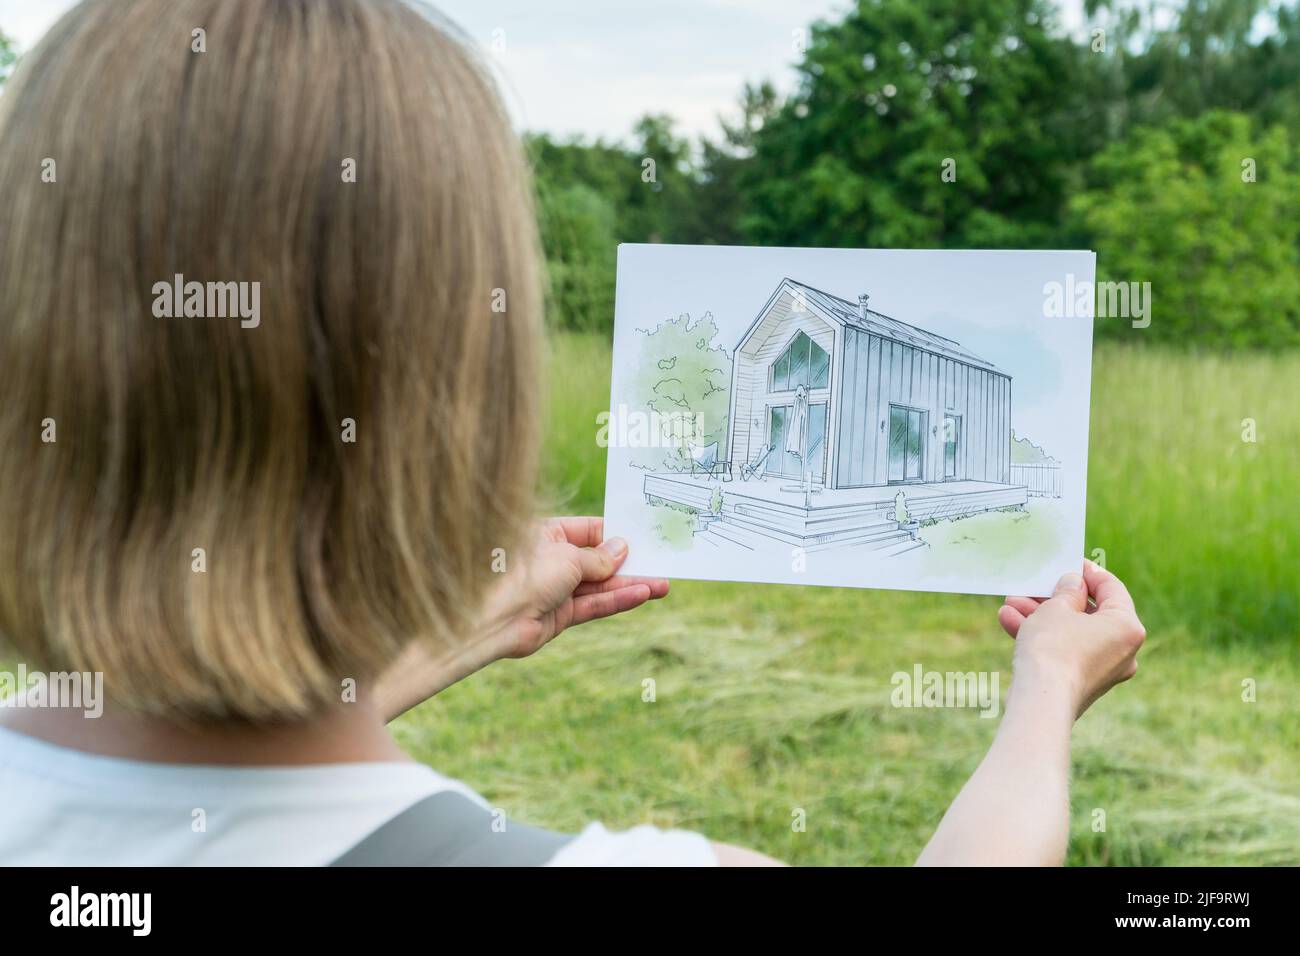 Architect holding barn house  hand drawn sketch in front of a plot of land.  Architectural design concept Stock Photo